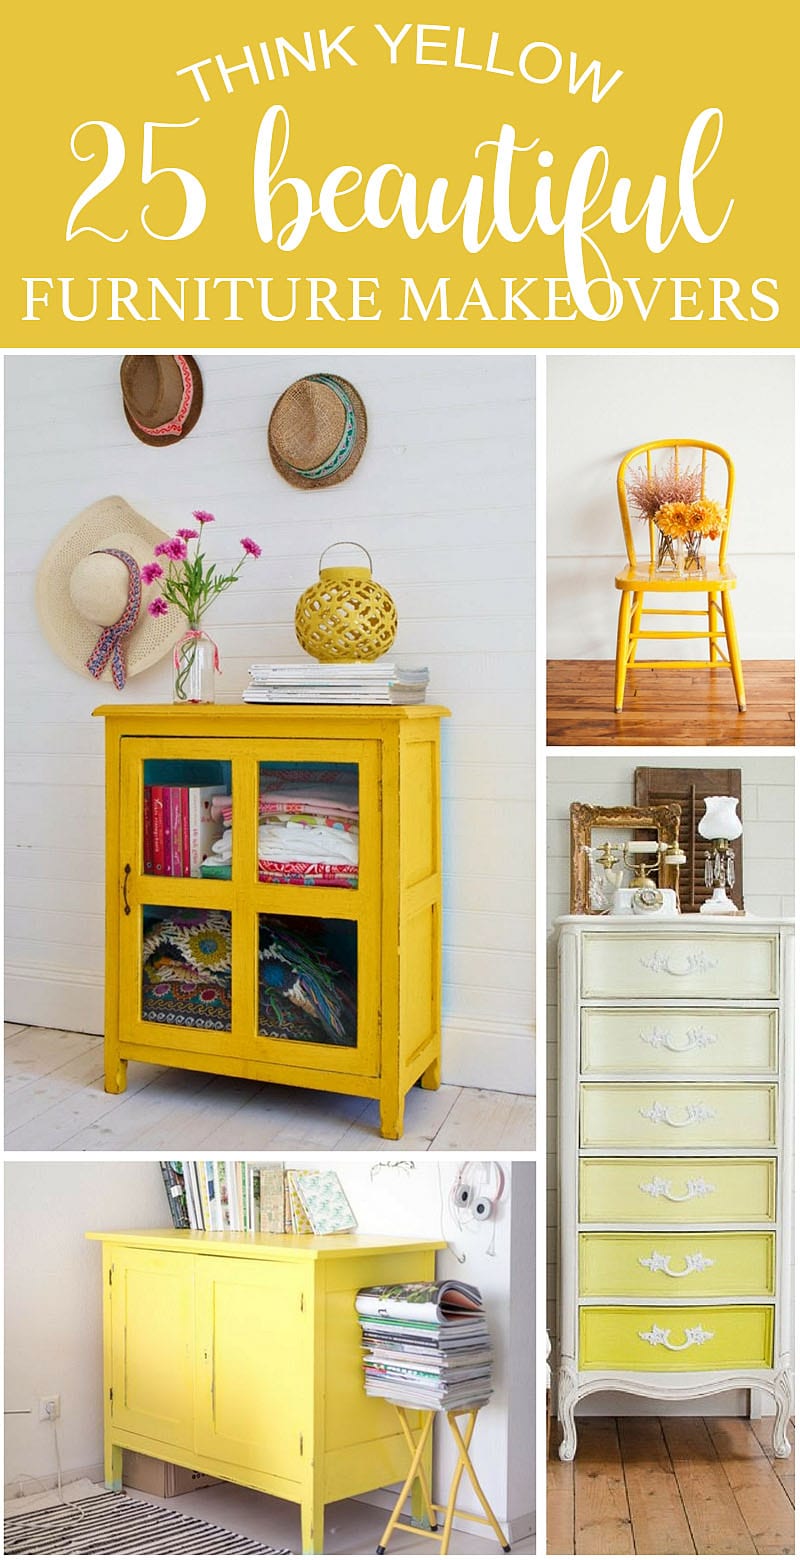 Think YELLOW - 25 Beautiful Furniture MakeOvers-SI Blog